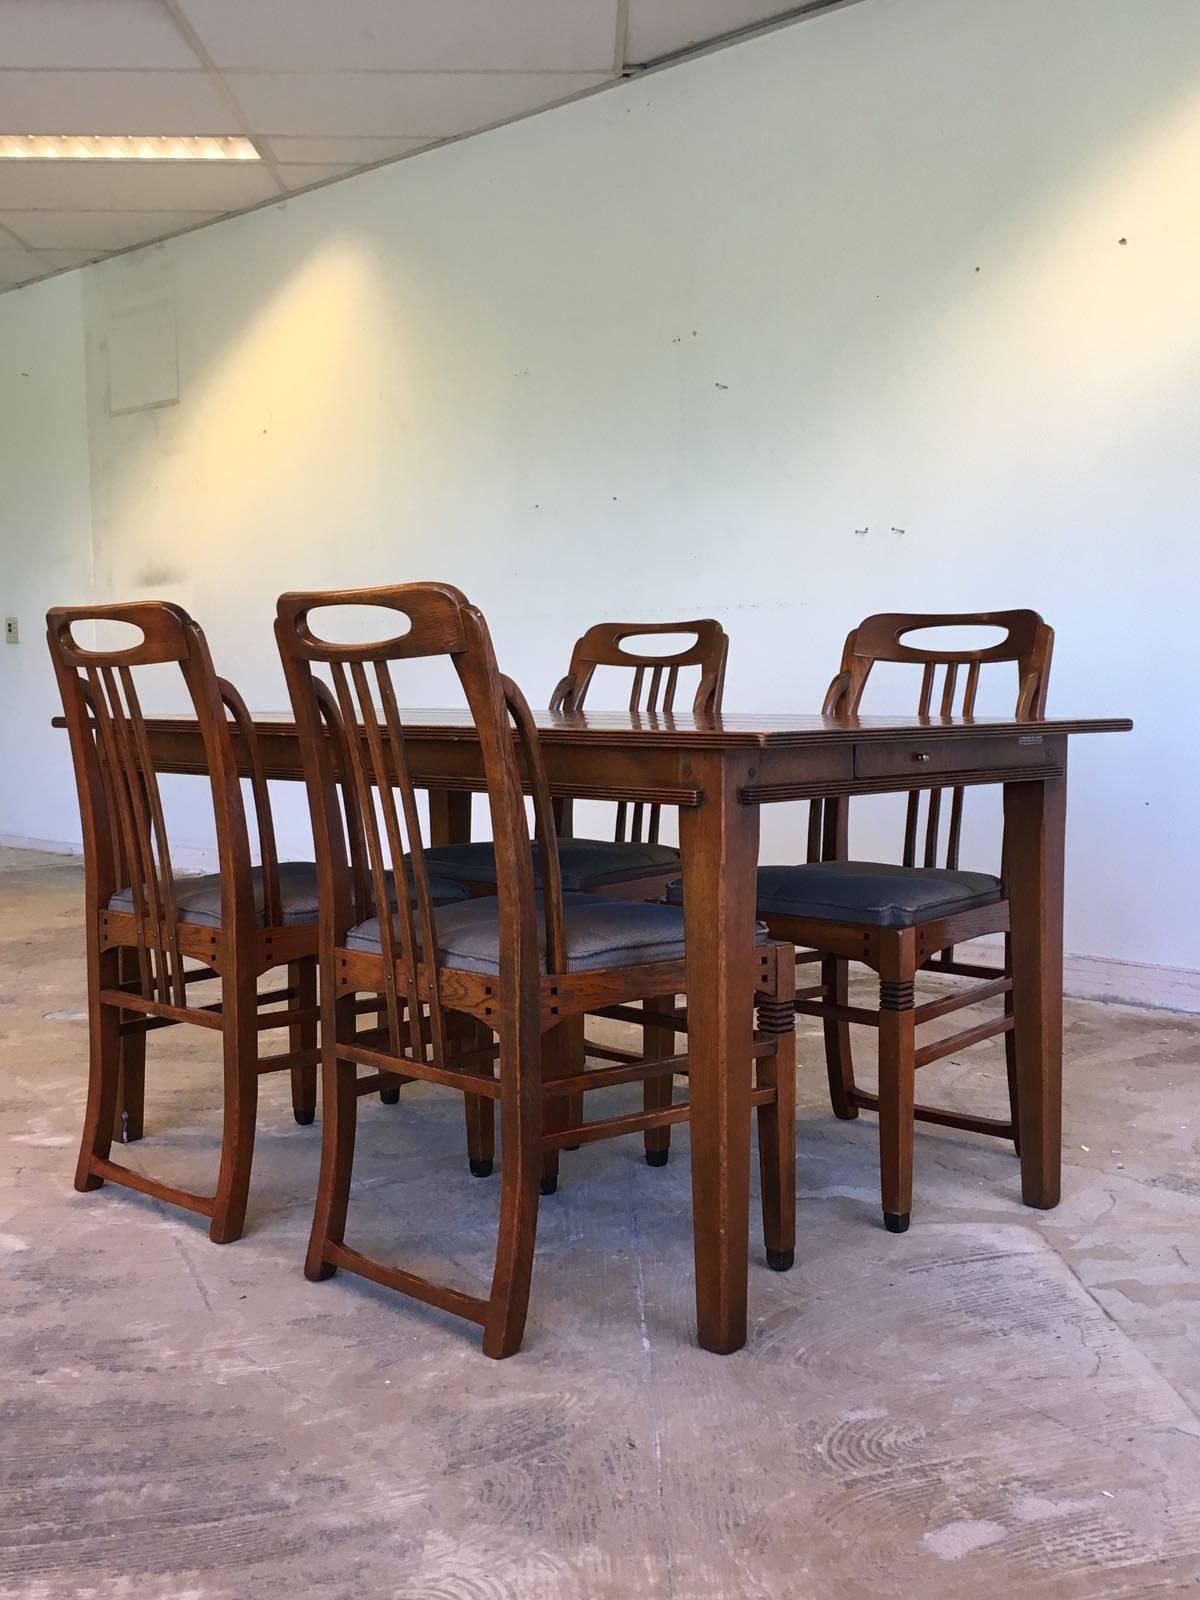 This wonderful dining room set was manufactured by (Frits) Schuitema & Zonen in the Netherlands. It features four exclusive Art Deco style chairs and a dining table with a drawer to the side. All of the pieces are sturdy and in a very nice